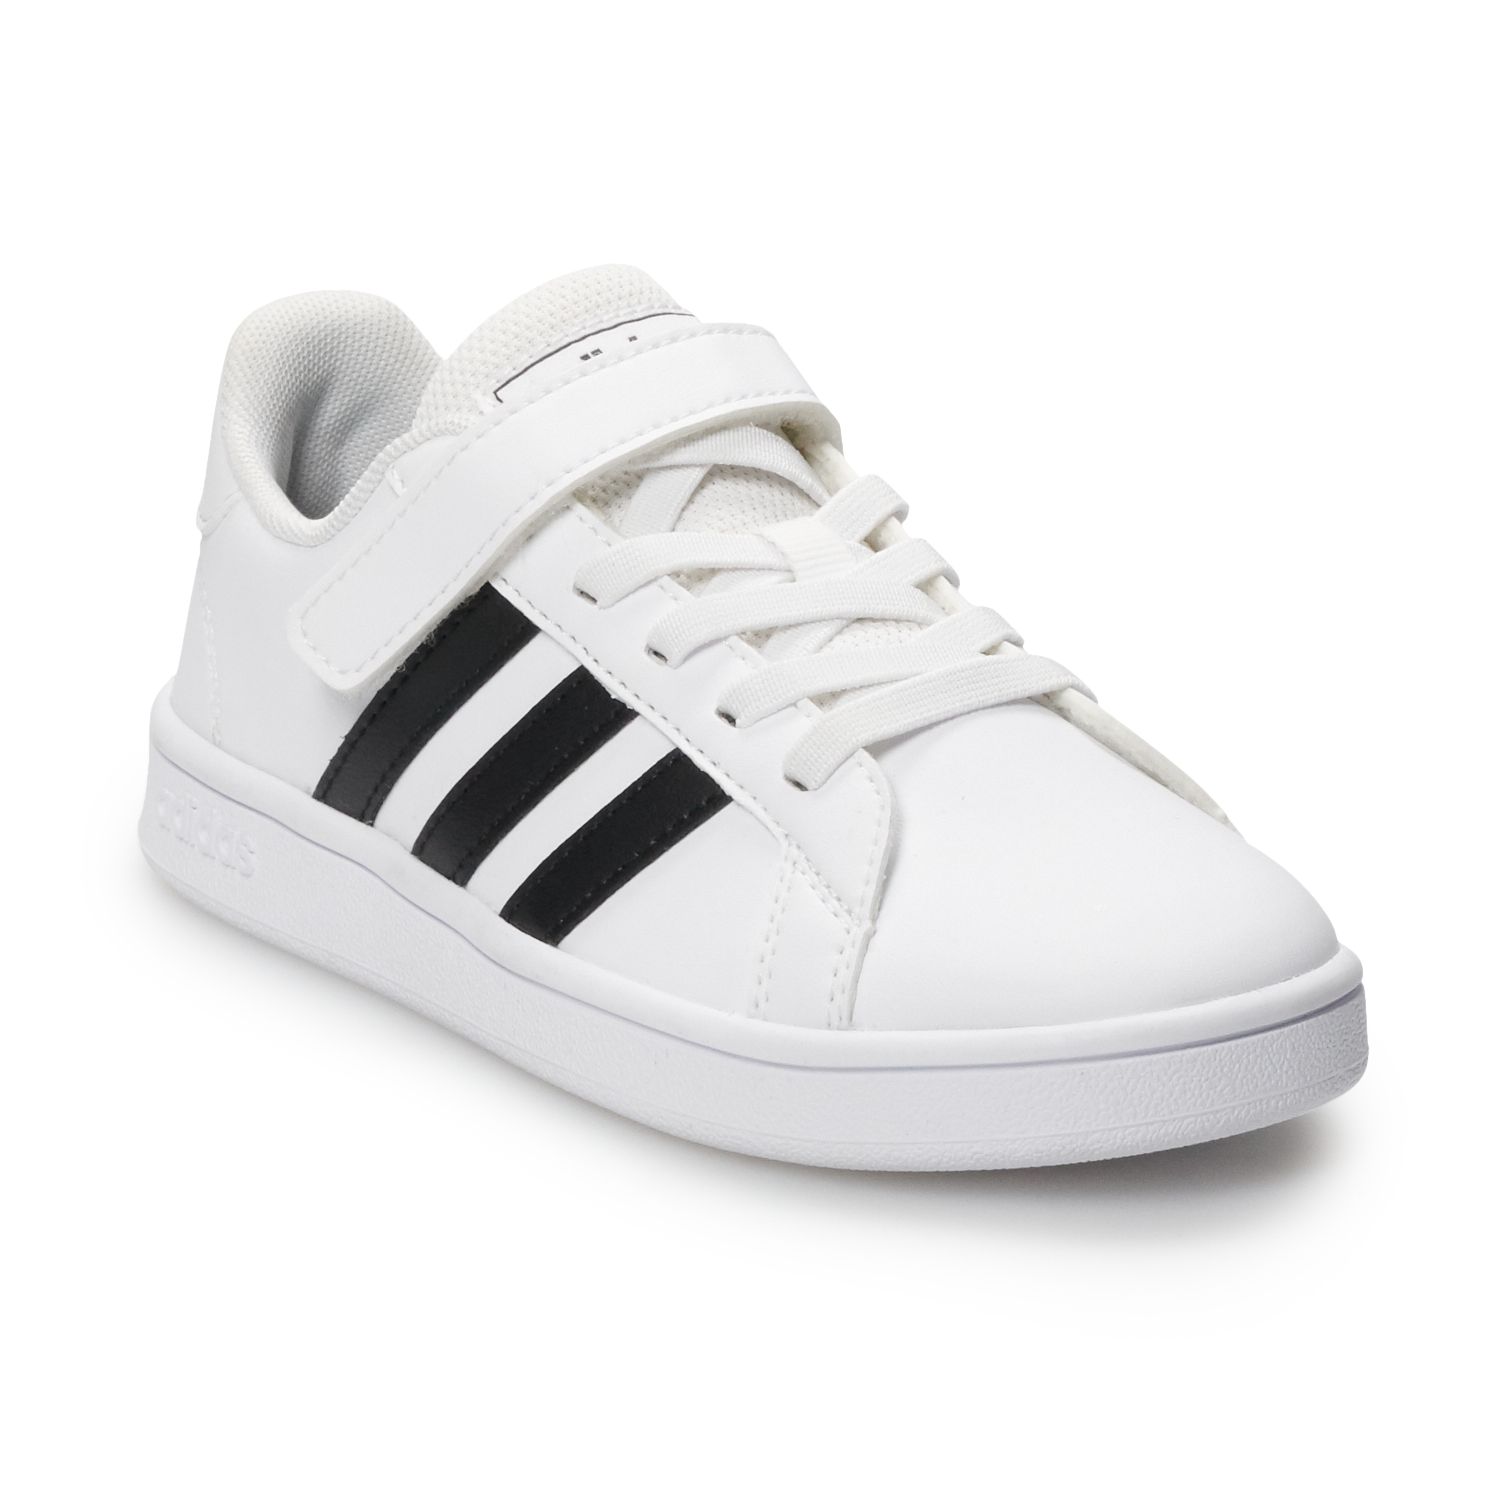 white shoes for girls adidas